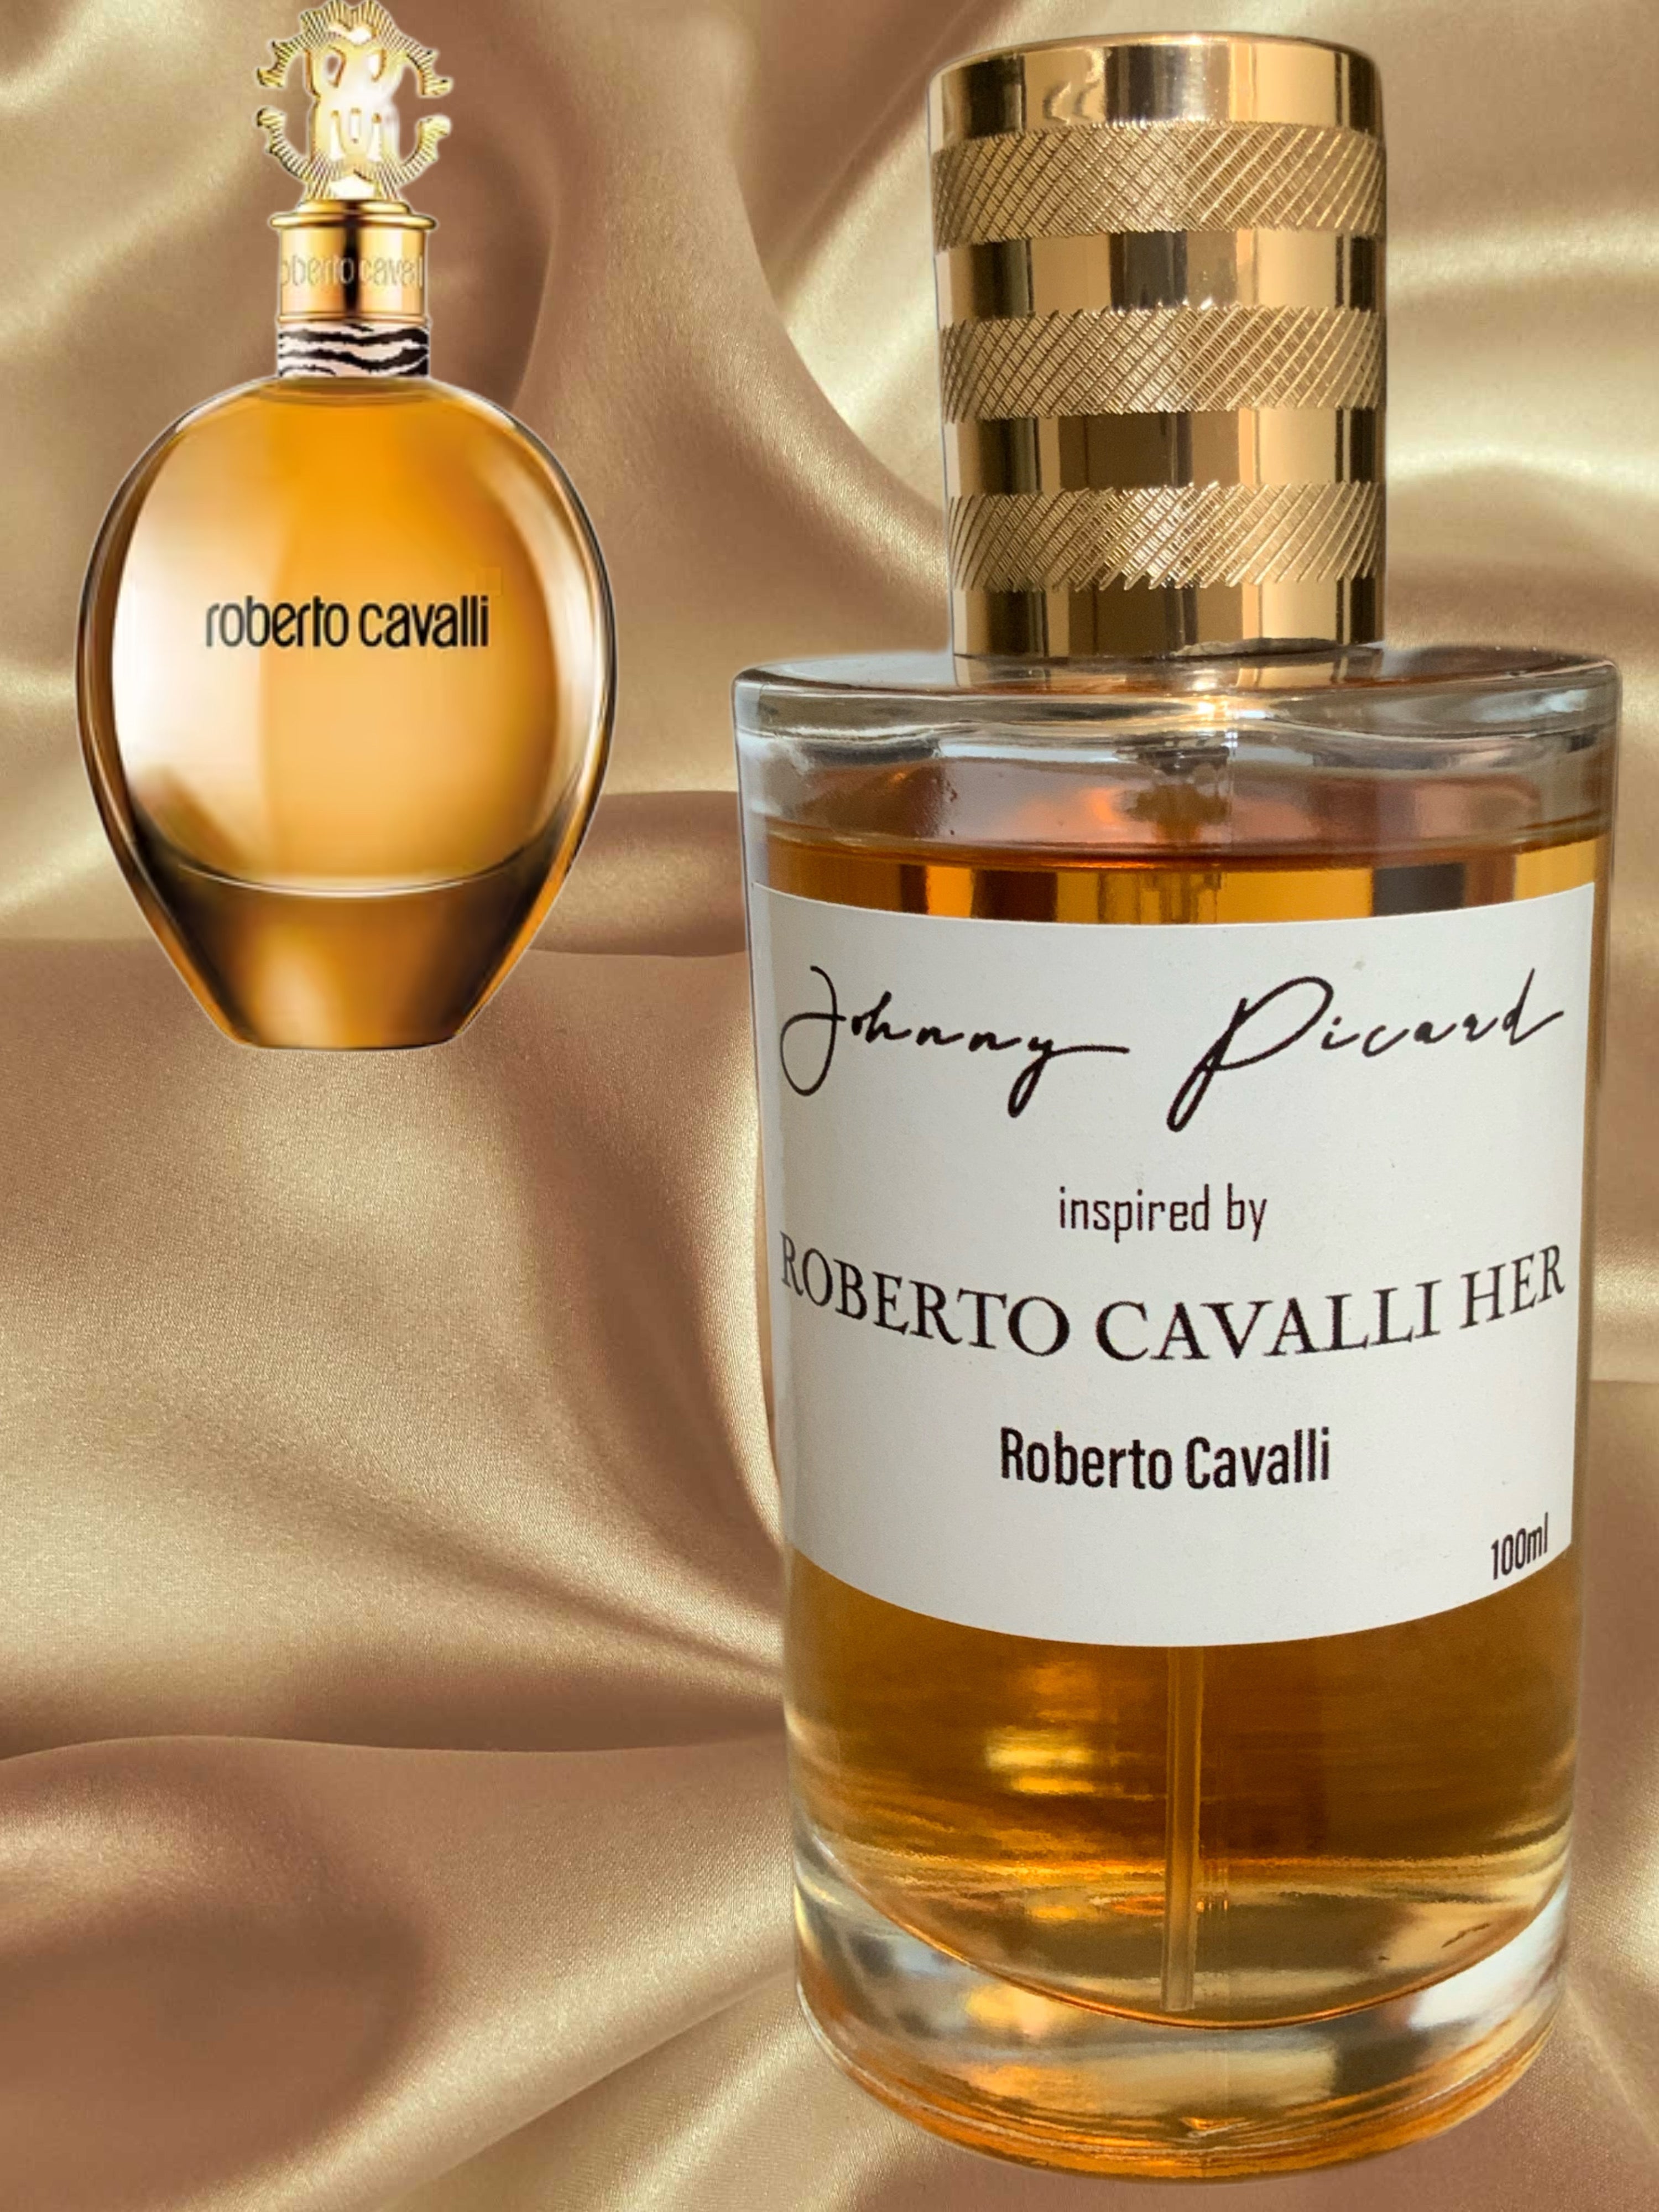 johnny picard inspired by roberto cavalli for her  ROBERTO CAVALLI